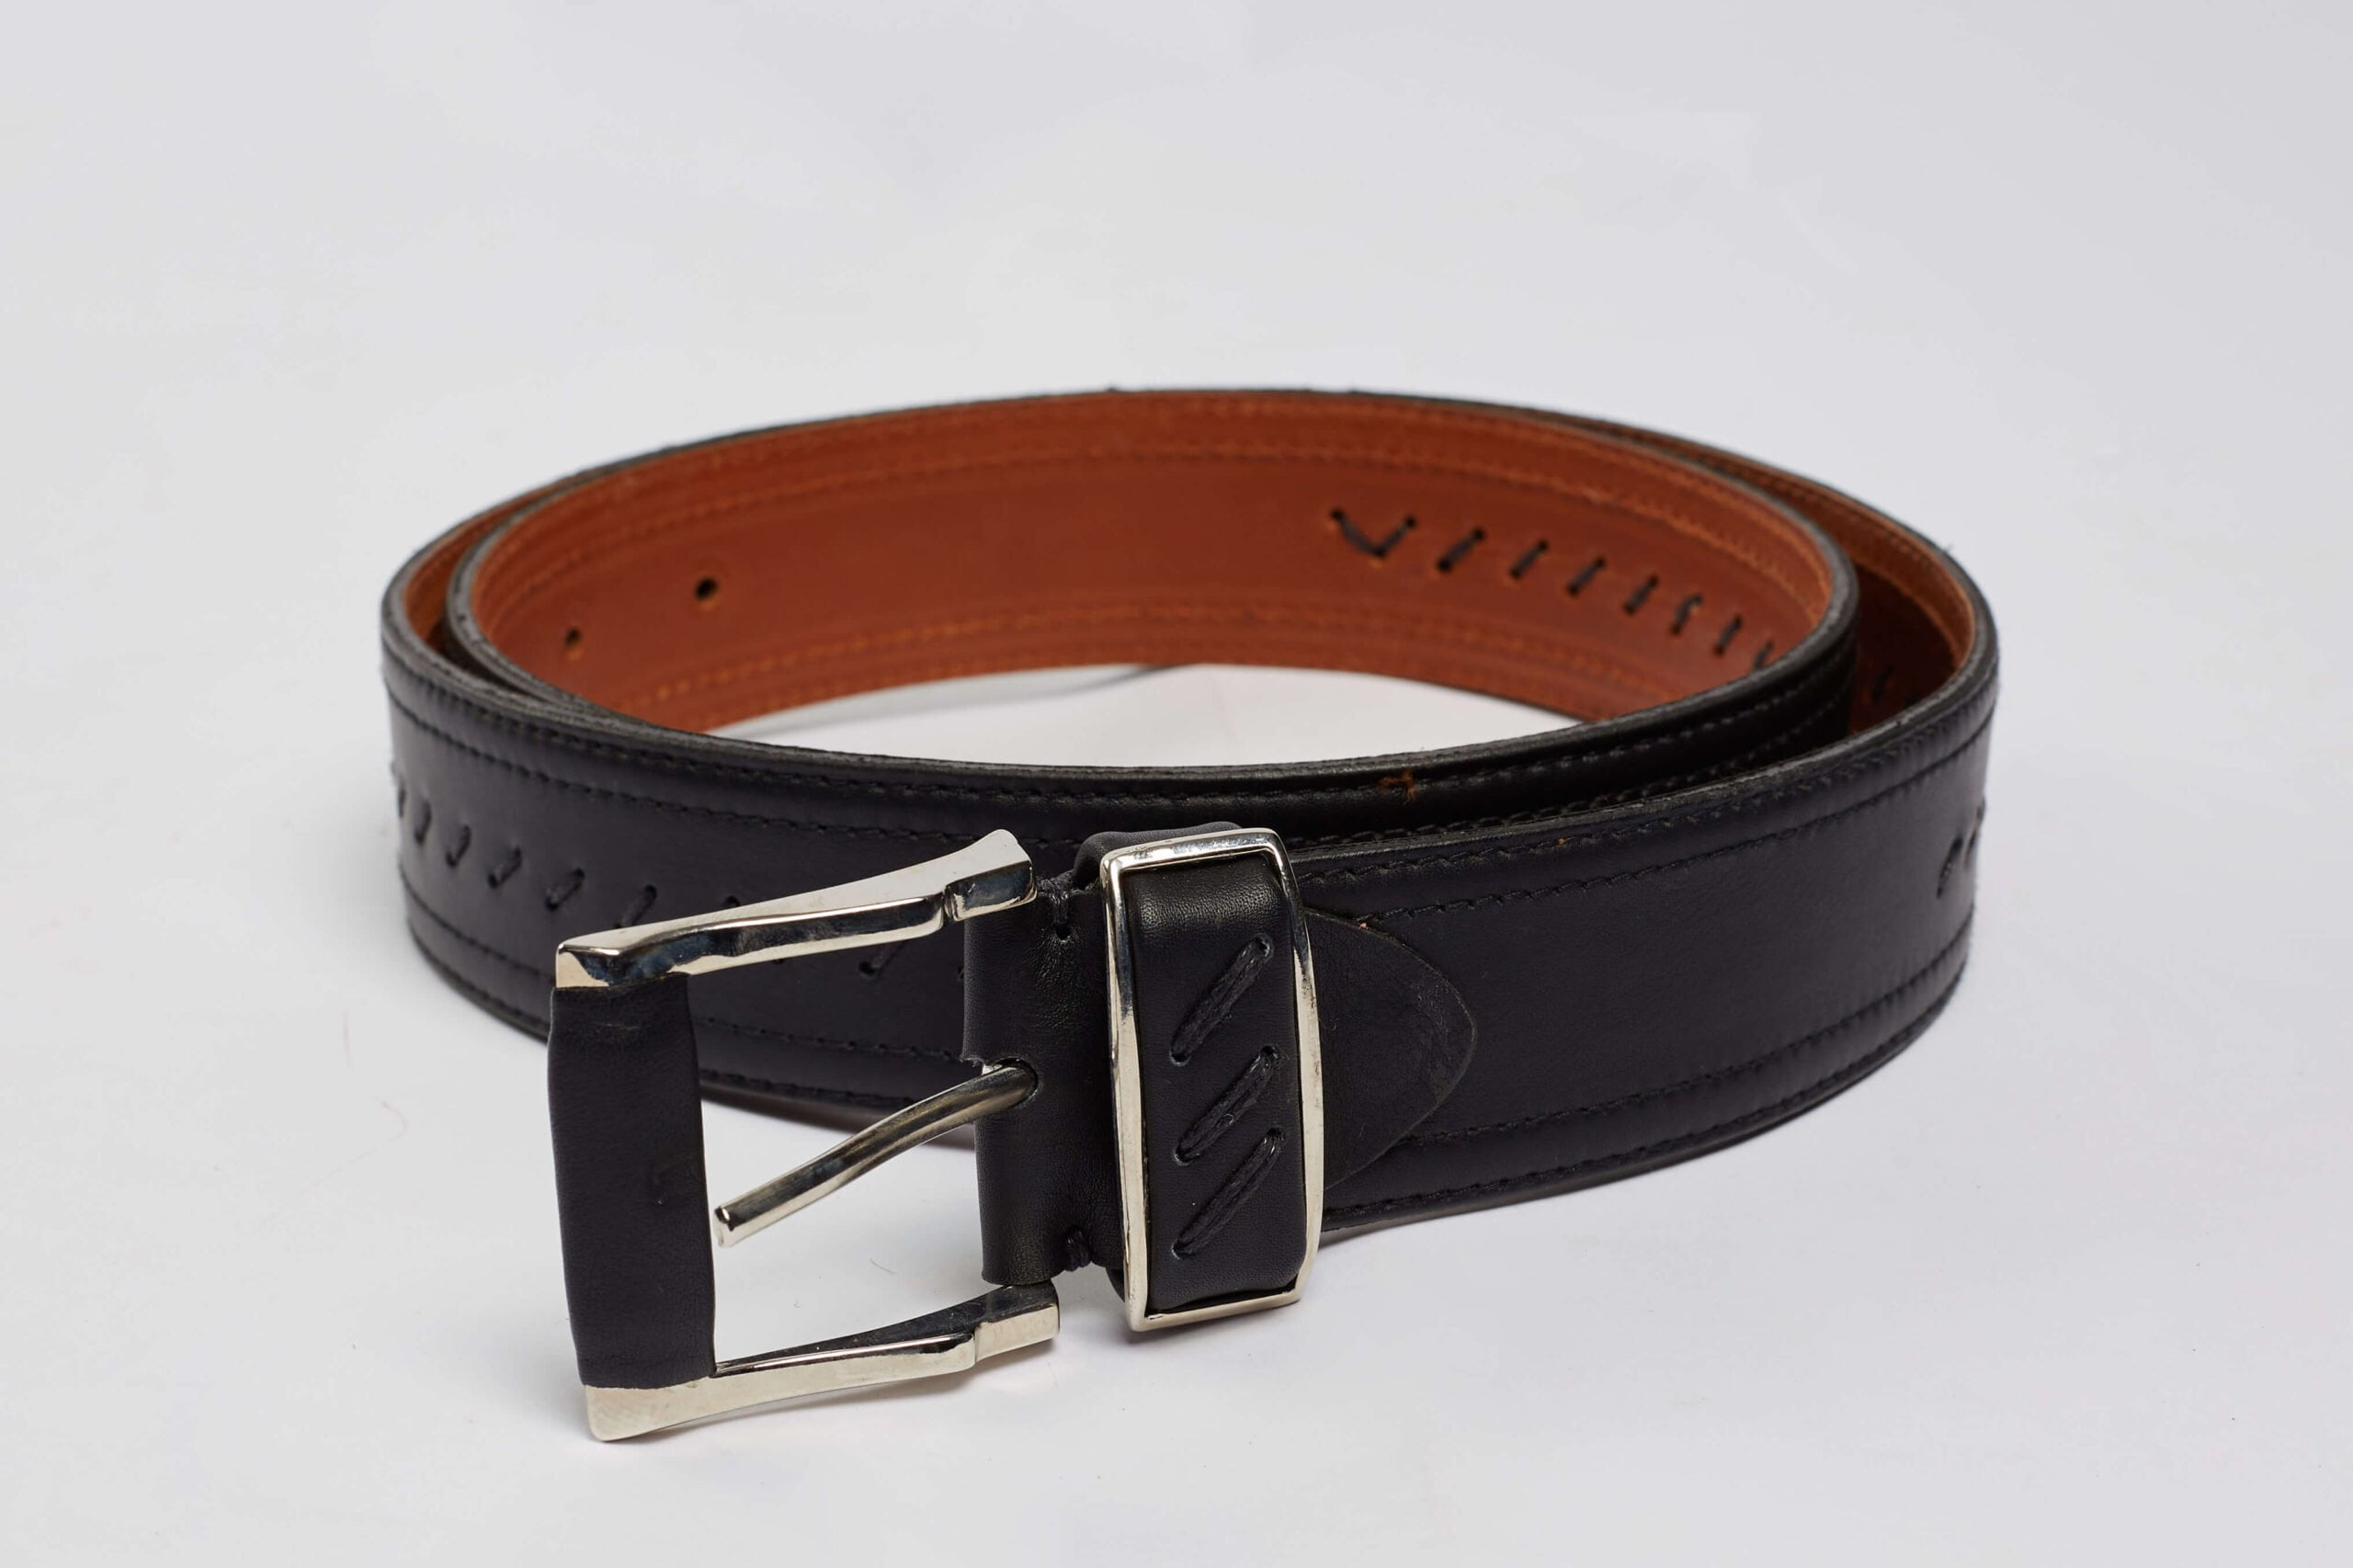 Full Grain Leather Belts - CHARGEO